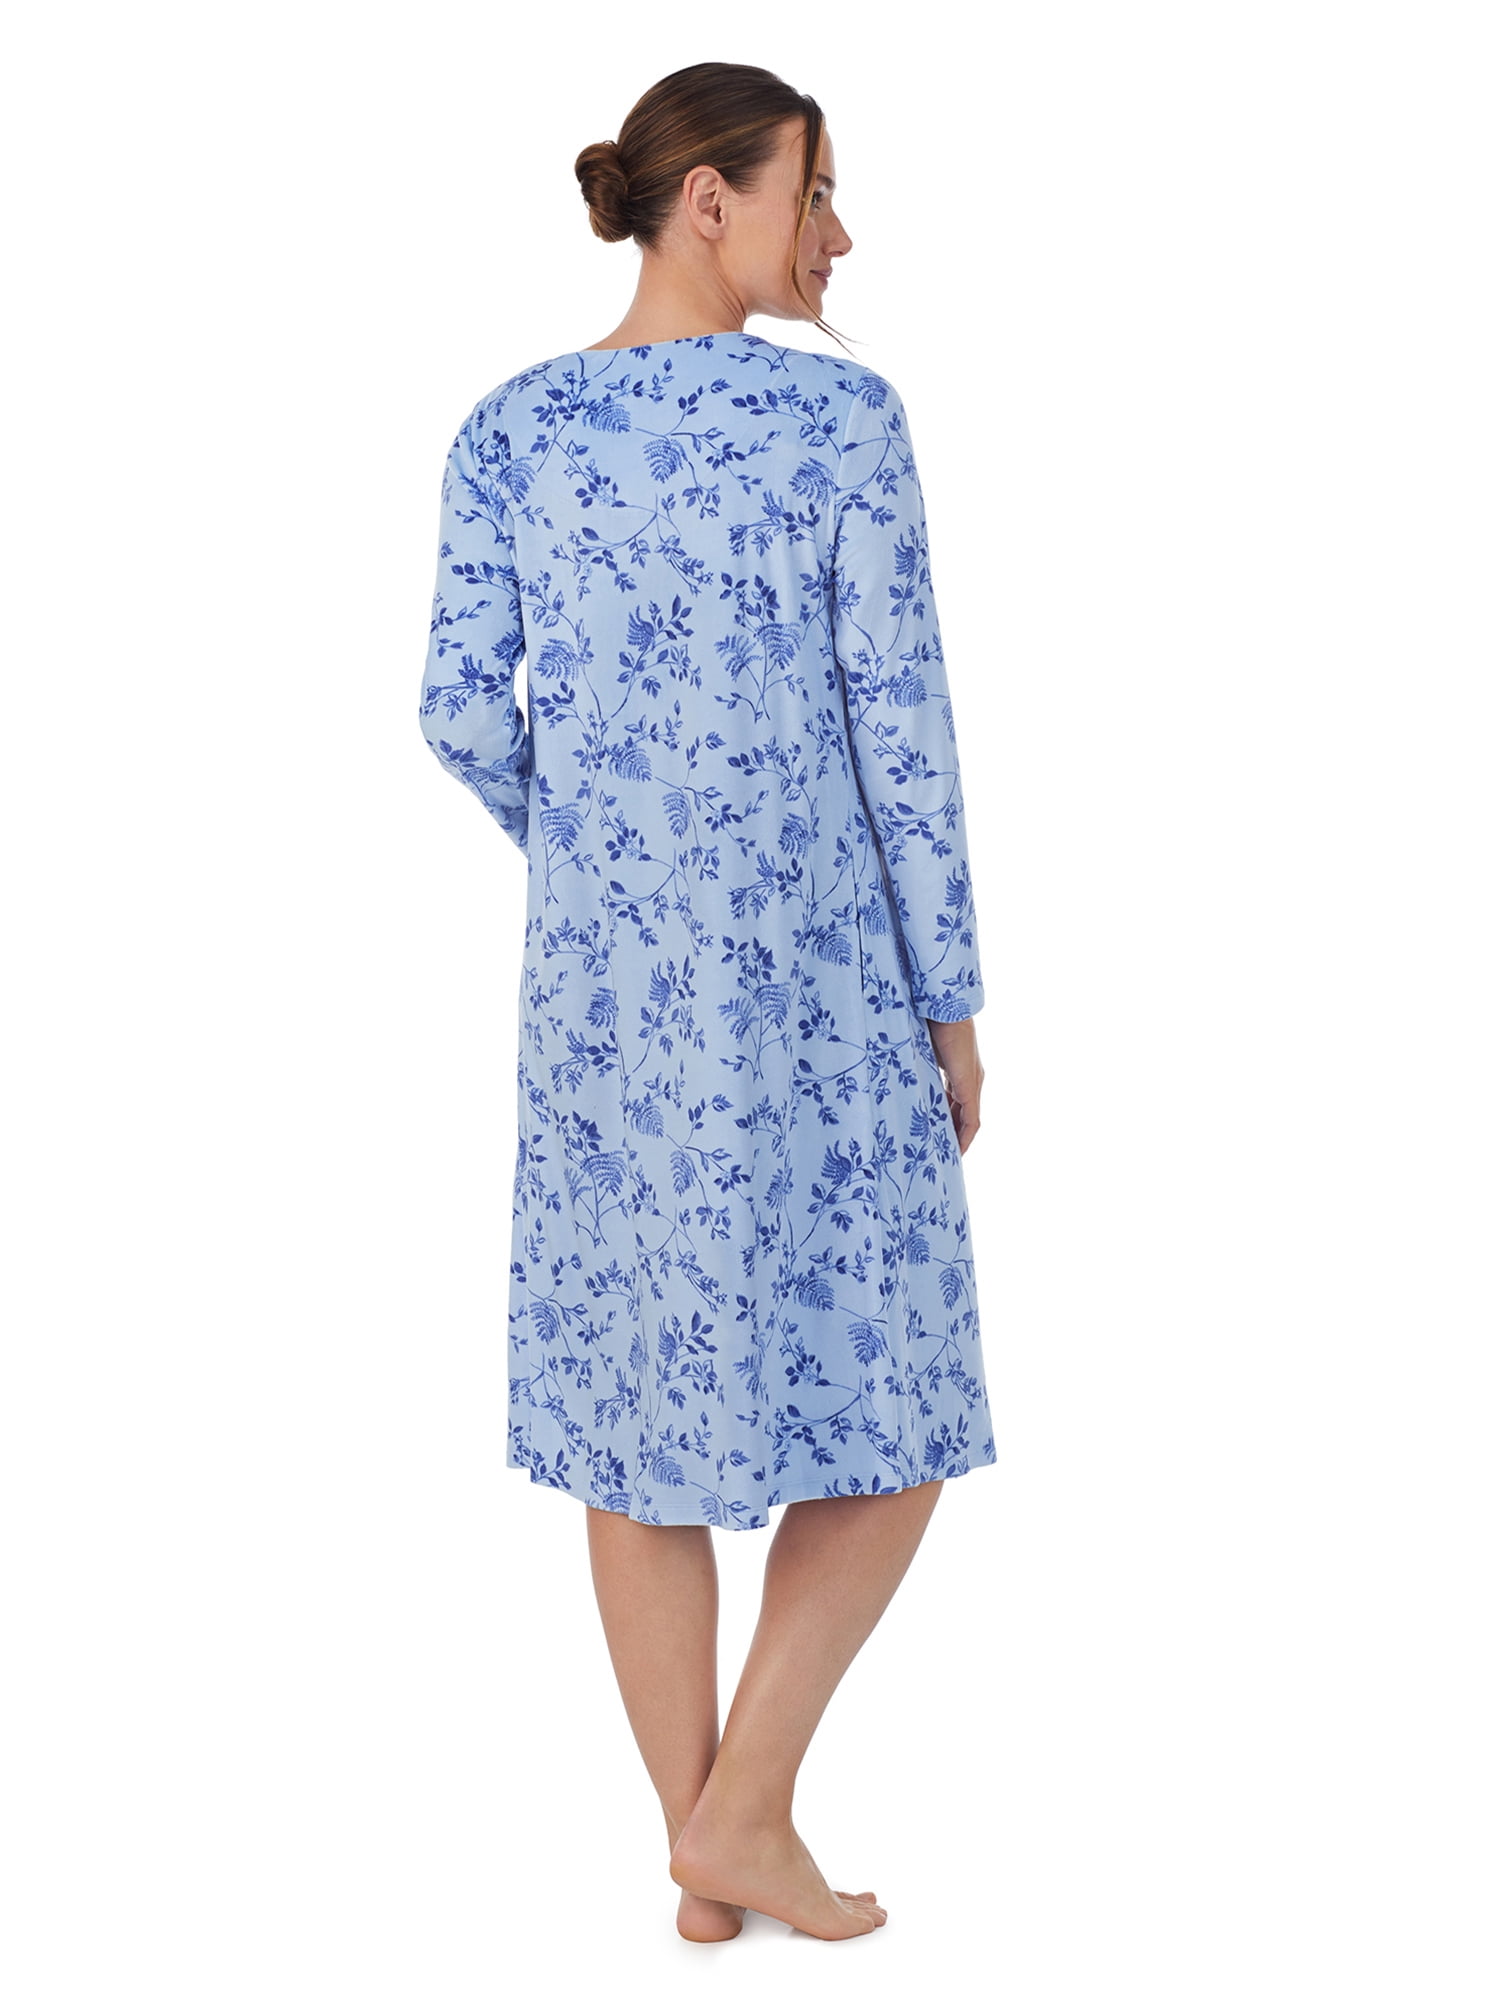 Long nightgown: Andra 838